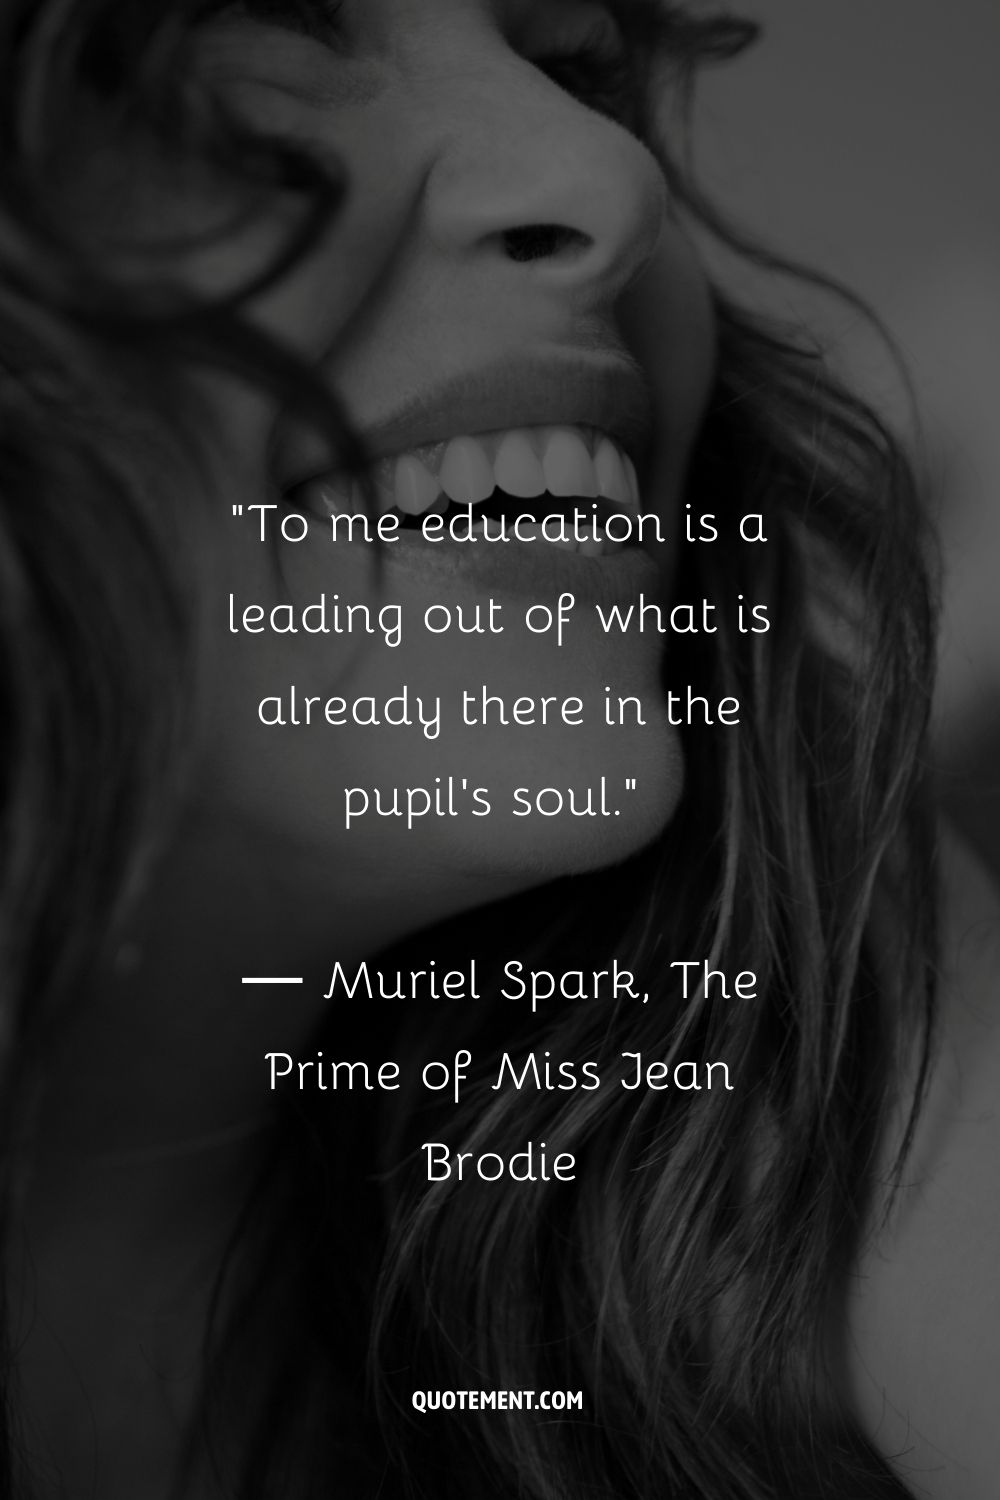 To me education is a leading out of what is already there in the pupil's soul.